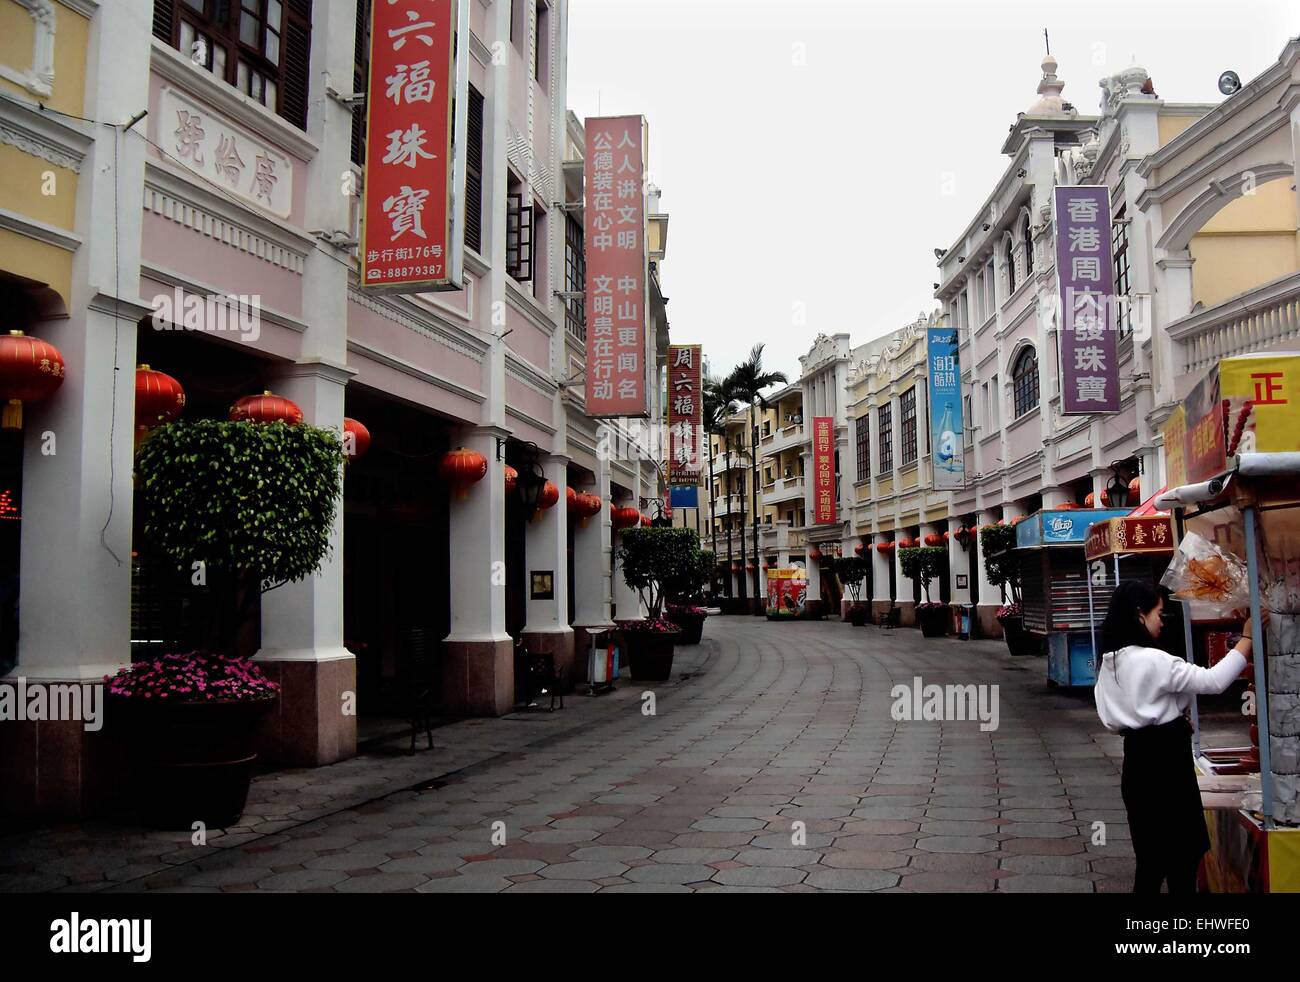 (150318) -- BEIJING, March 18, 2015 (Xinhua) -- Photo taken on March 8, 2015 shows a rebuilt Qilou commercial street in Zhongshan City, south China's Guangdong Province. Qilou buildings, or arcade-houses, were first popular in Europe and was then introduced to the world. China's first Qilou building was built in Guangzhou, capital of south China's Guangdong Province, which is also among the first coastal cities to embrace foreign culture and begin modernization. In the 30s and 40s, the Qilou architecture started to prevail in China's southern parts like Guangdong, Guangxi, Hainan and Fujian, Stock Photo